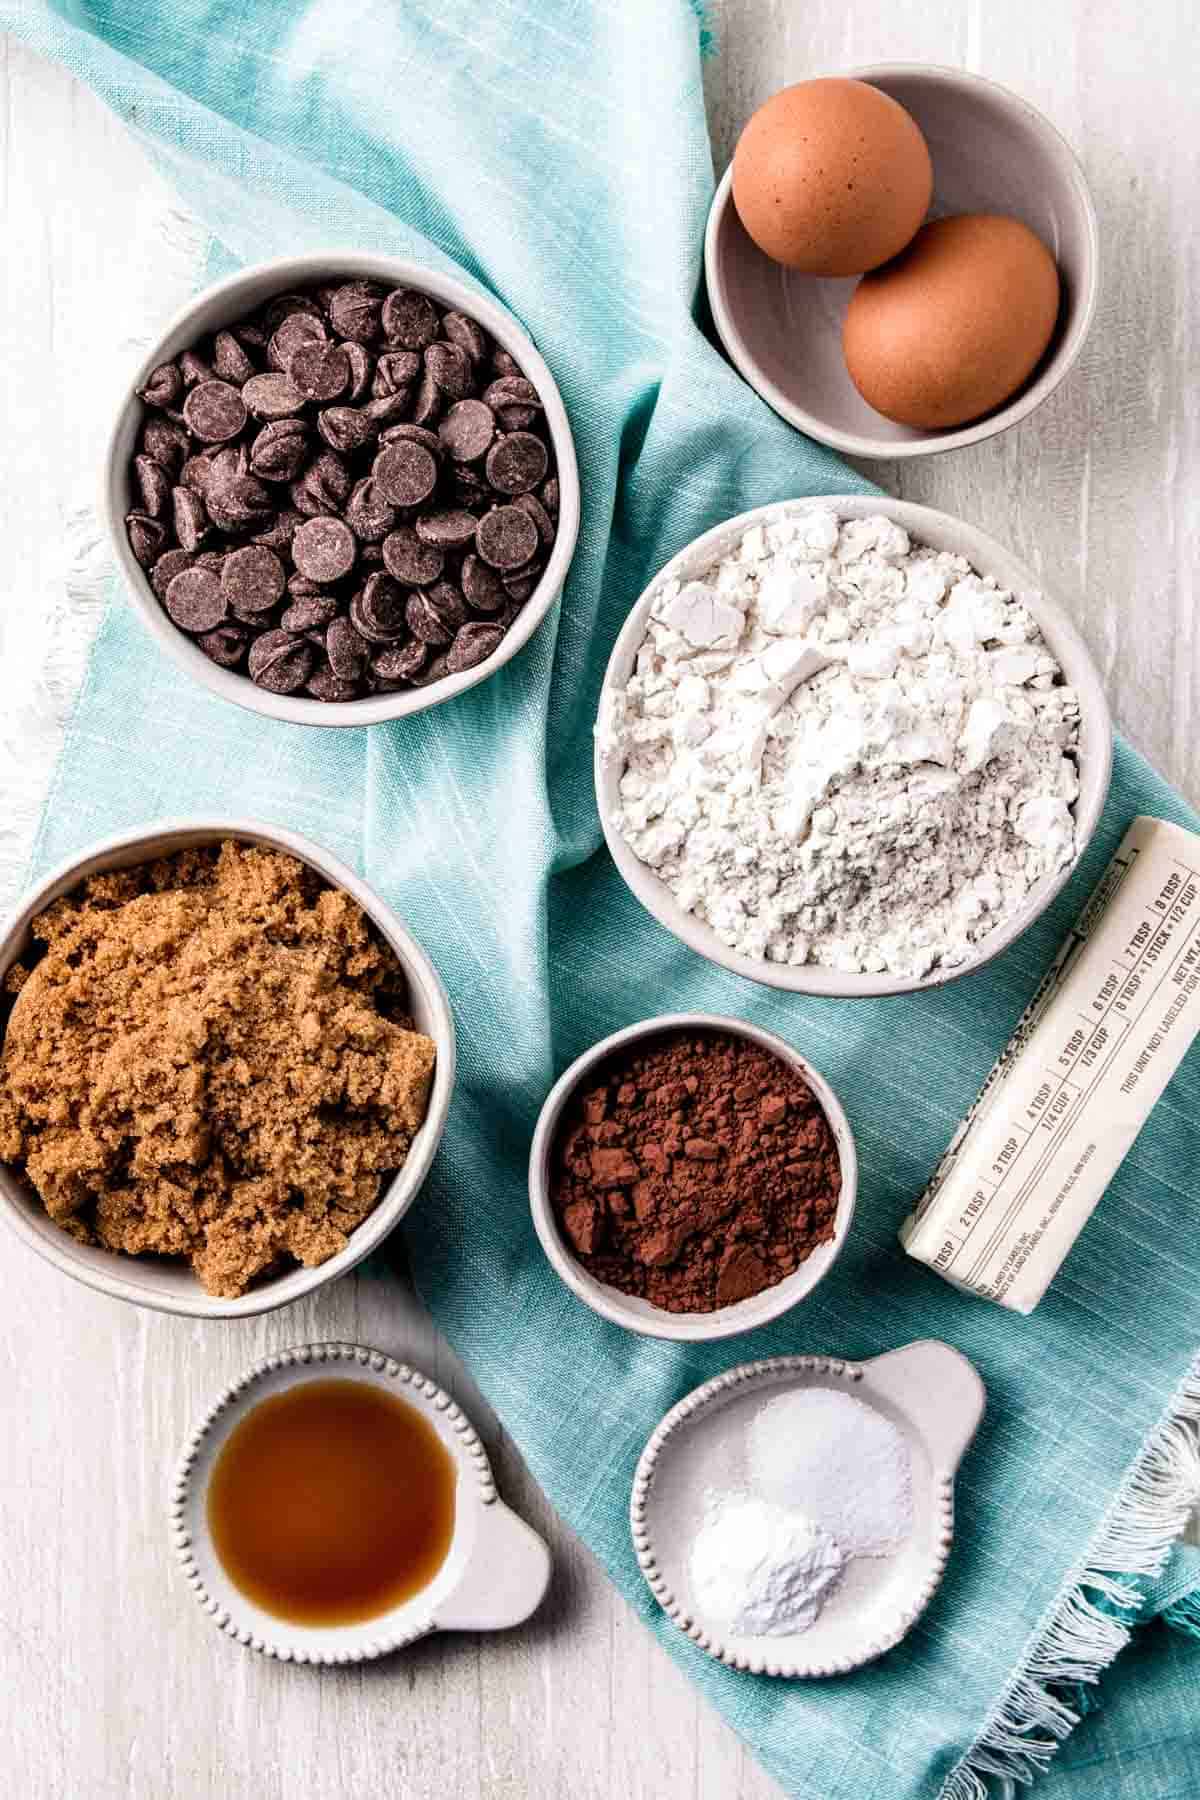 Ingredients in gluten-free double chocolate chip cookies measured out in bowls on a teal napkin.